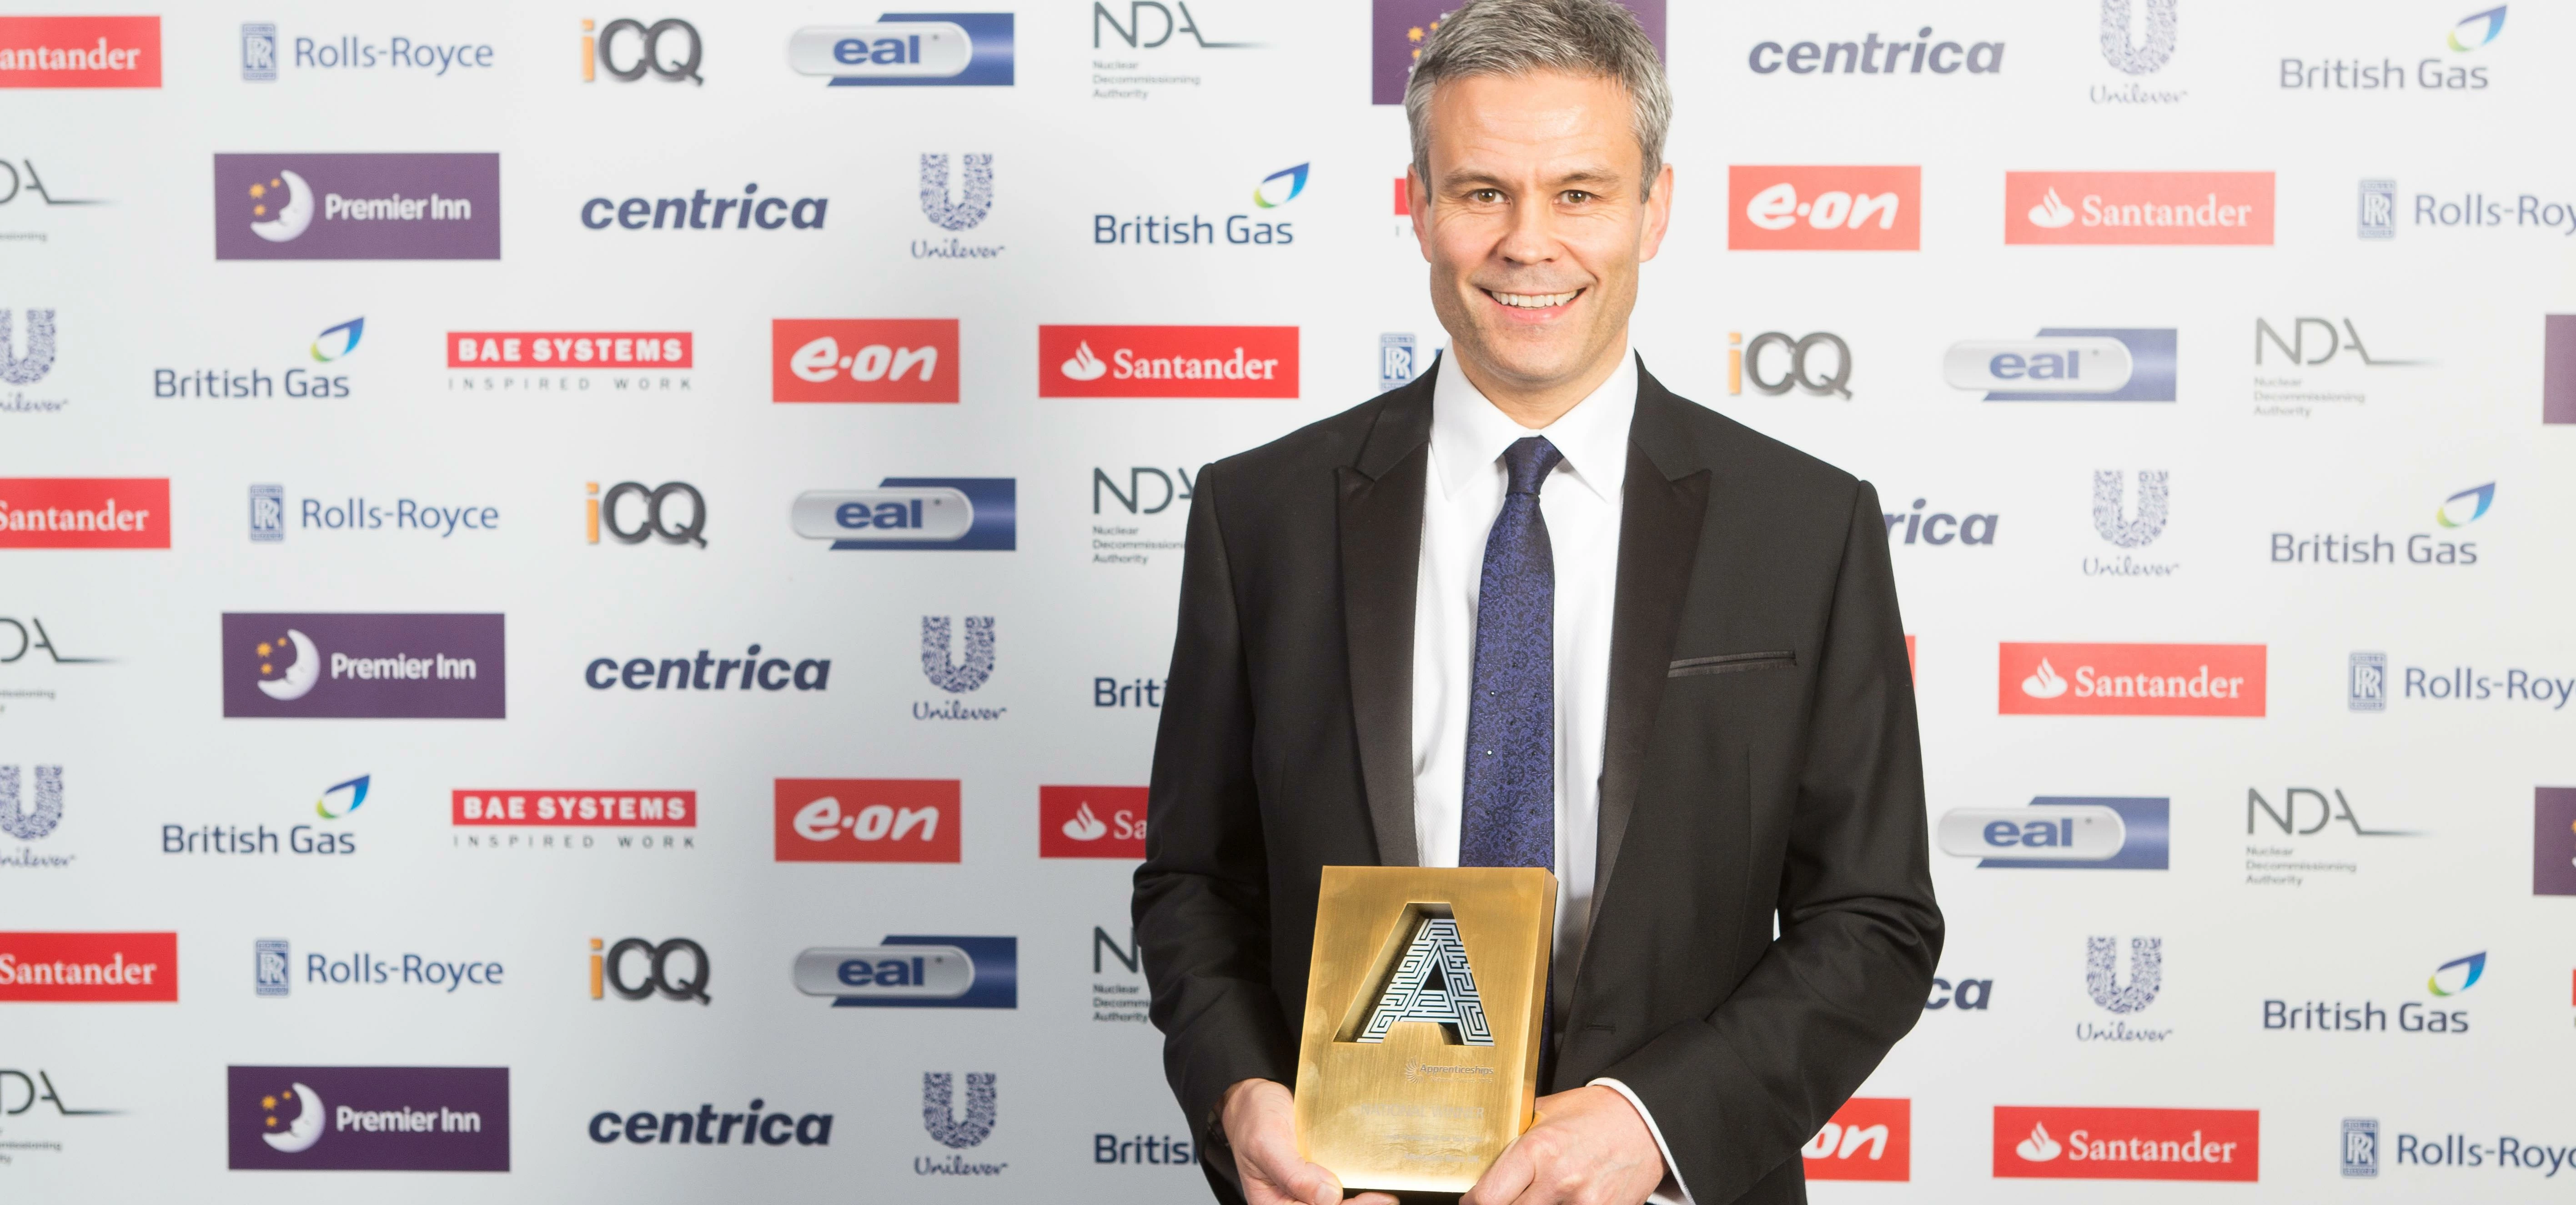 Andrew Mallery, Mercedes Benz UK, who wins The BAE Systems Award for Large Employer of the Year at t